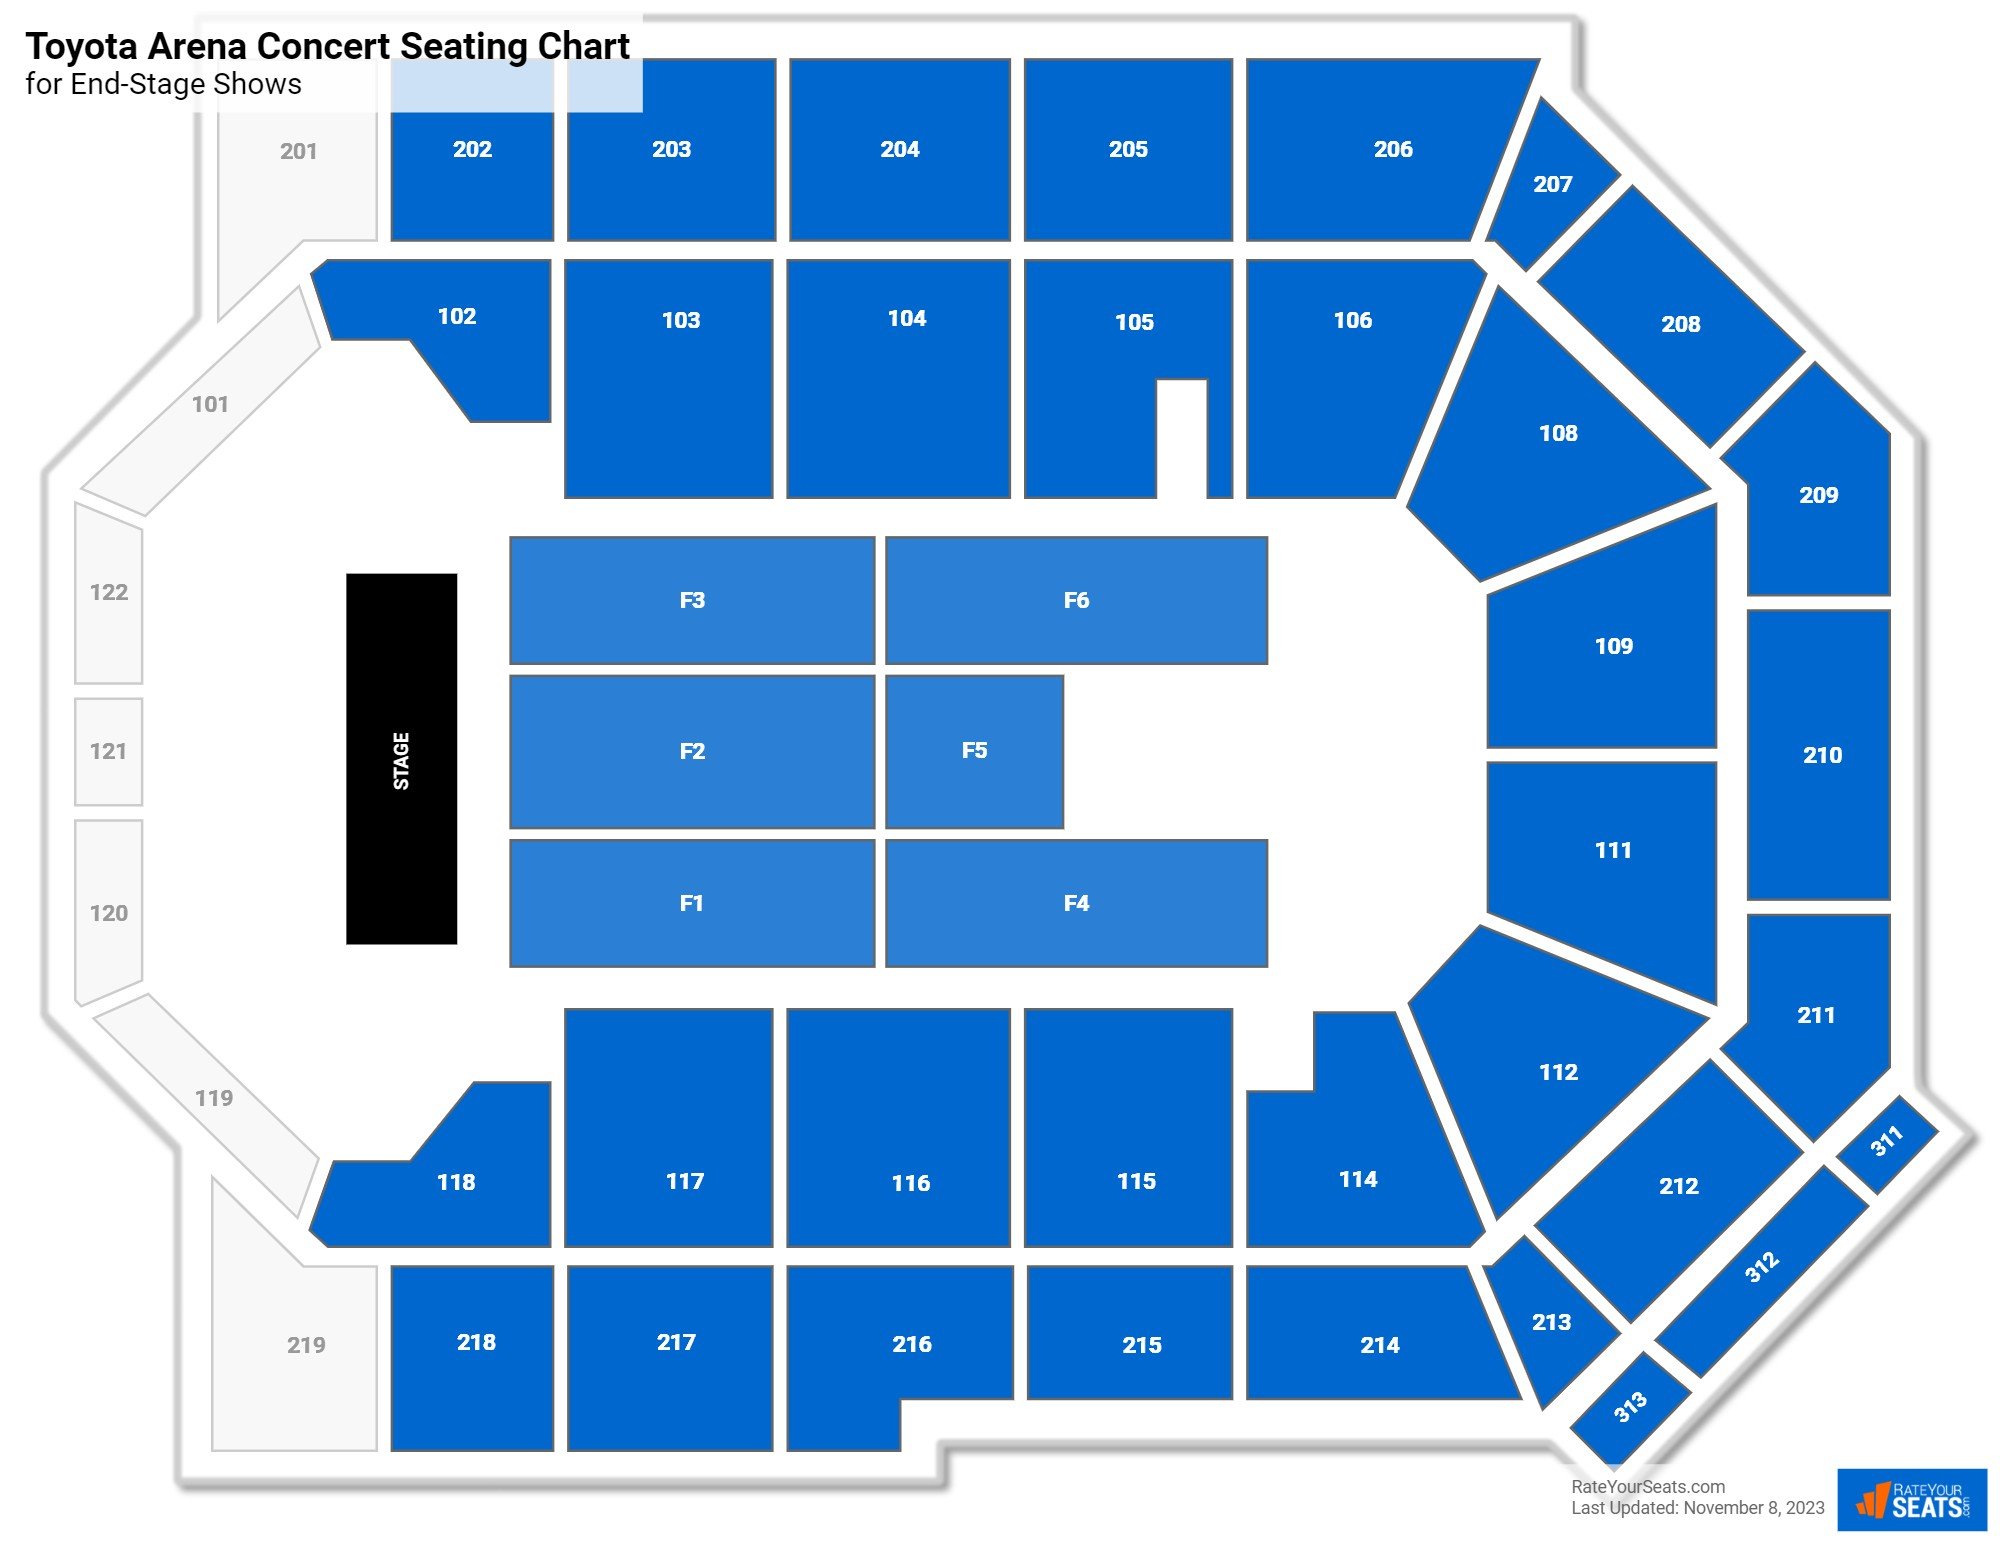 Toyota Arena Concert Seating Chart